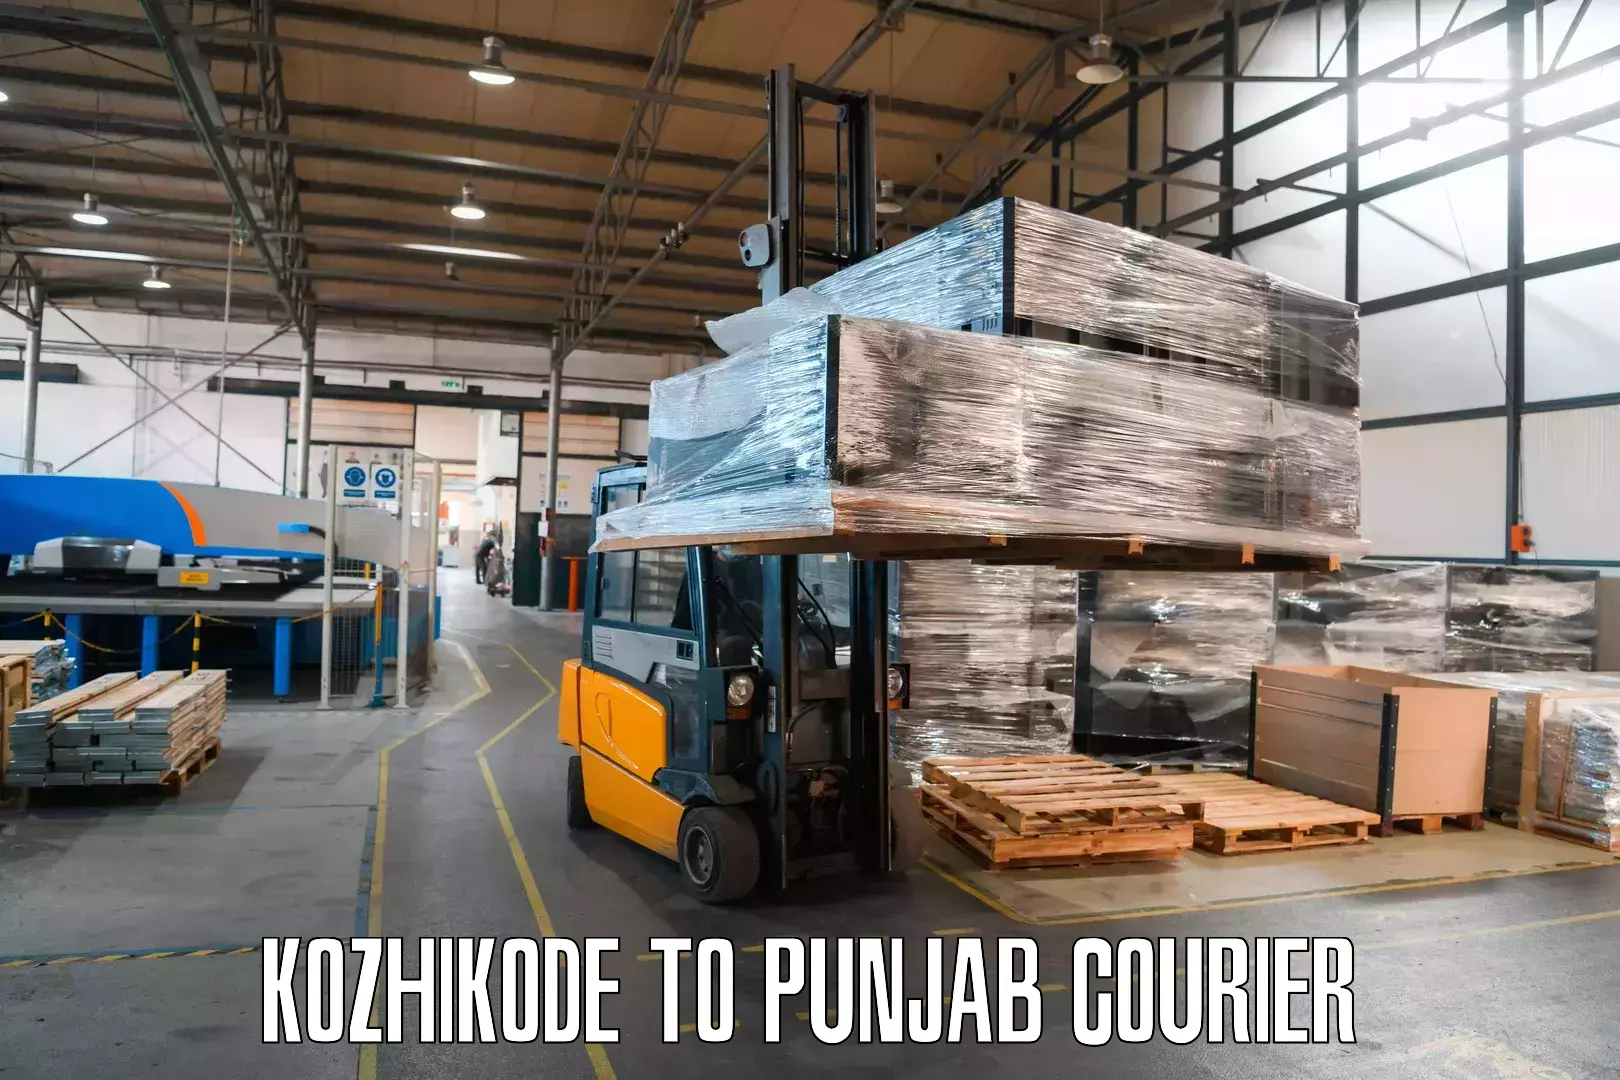 Residential courier service Kozhikode to Punjab